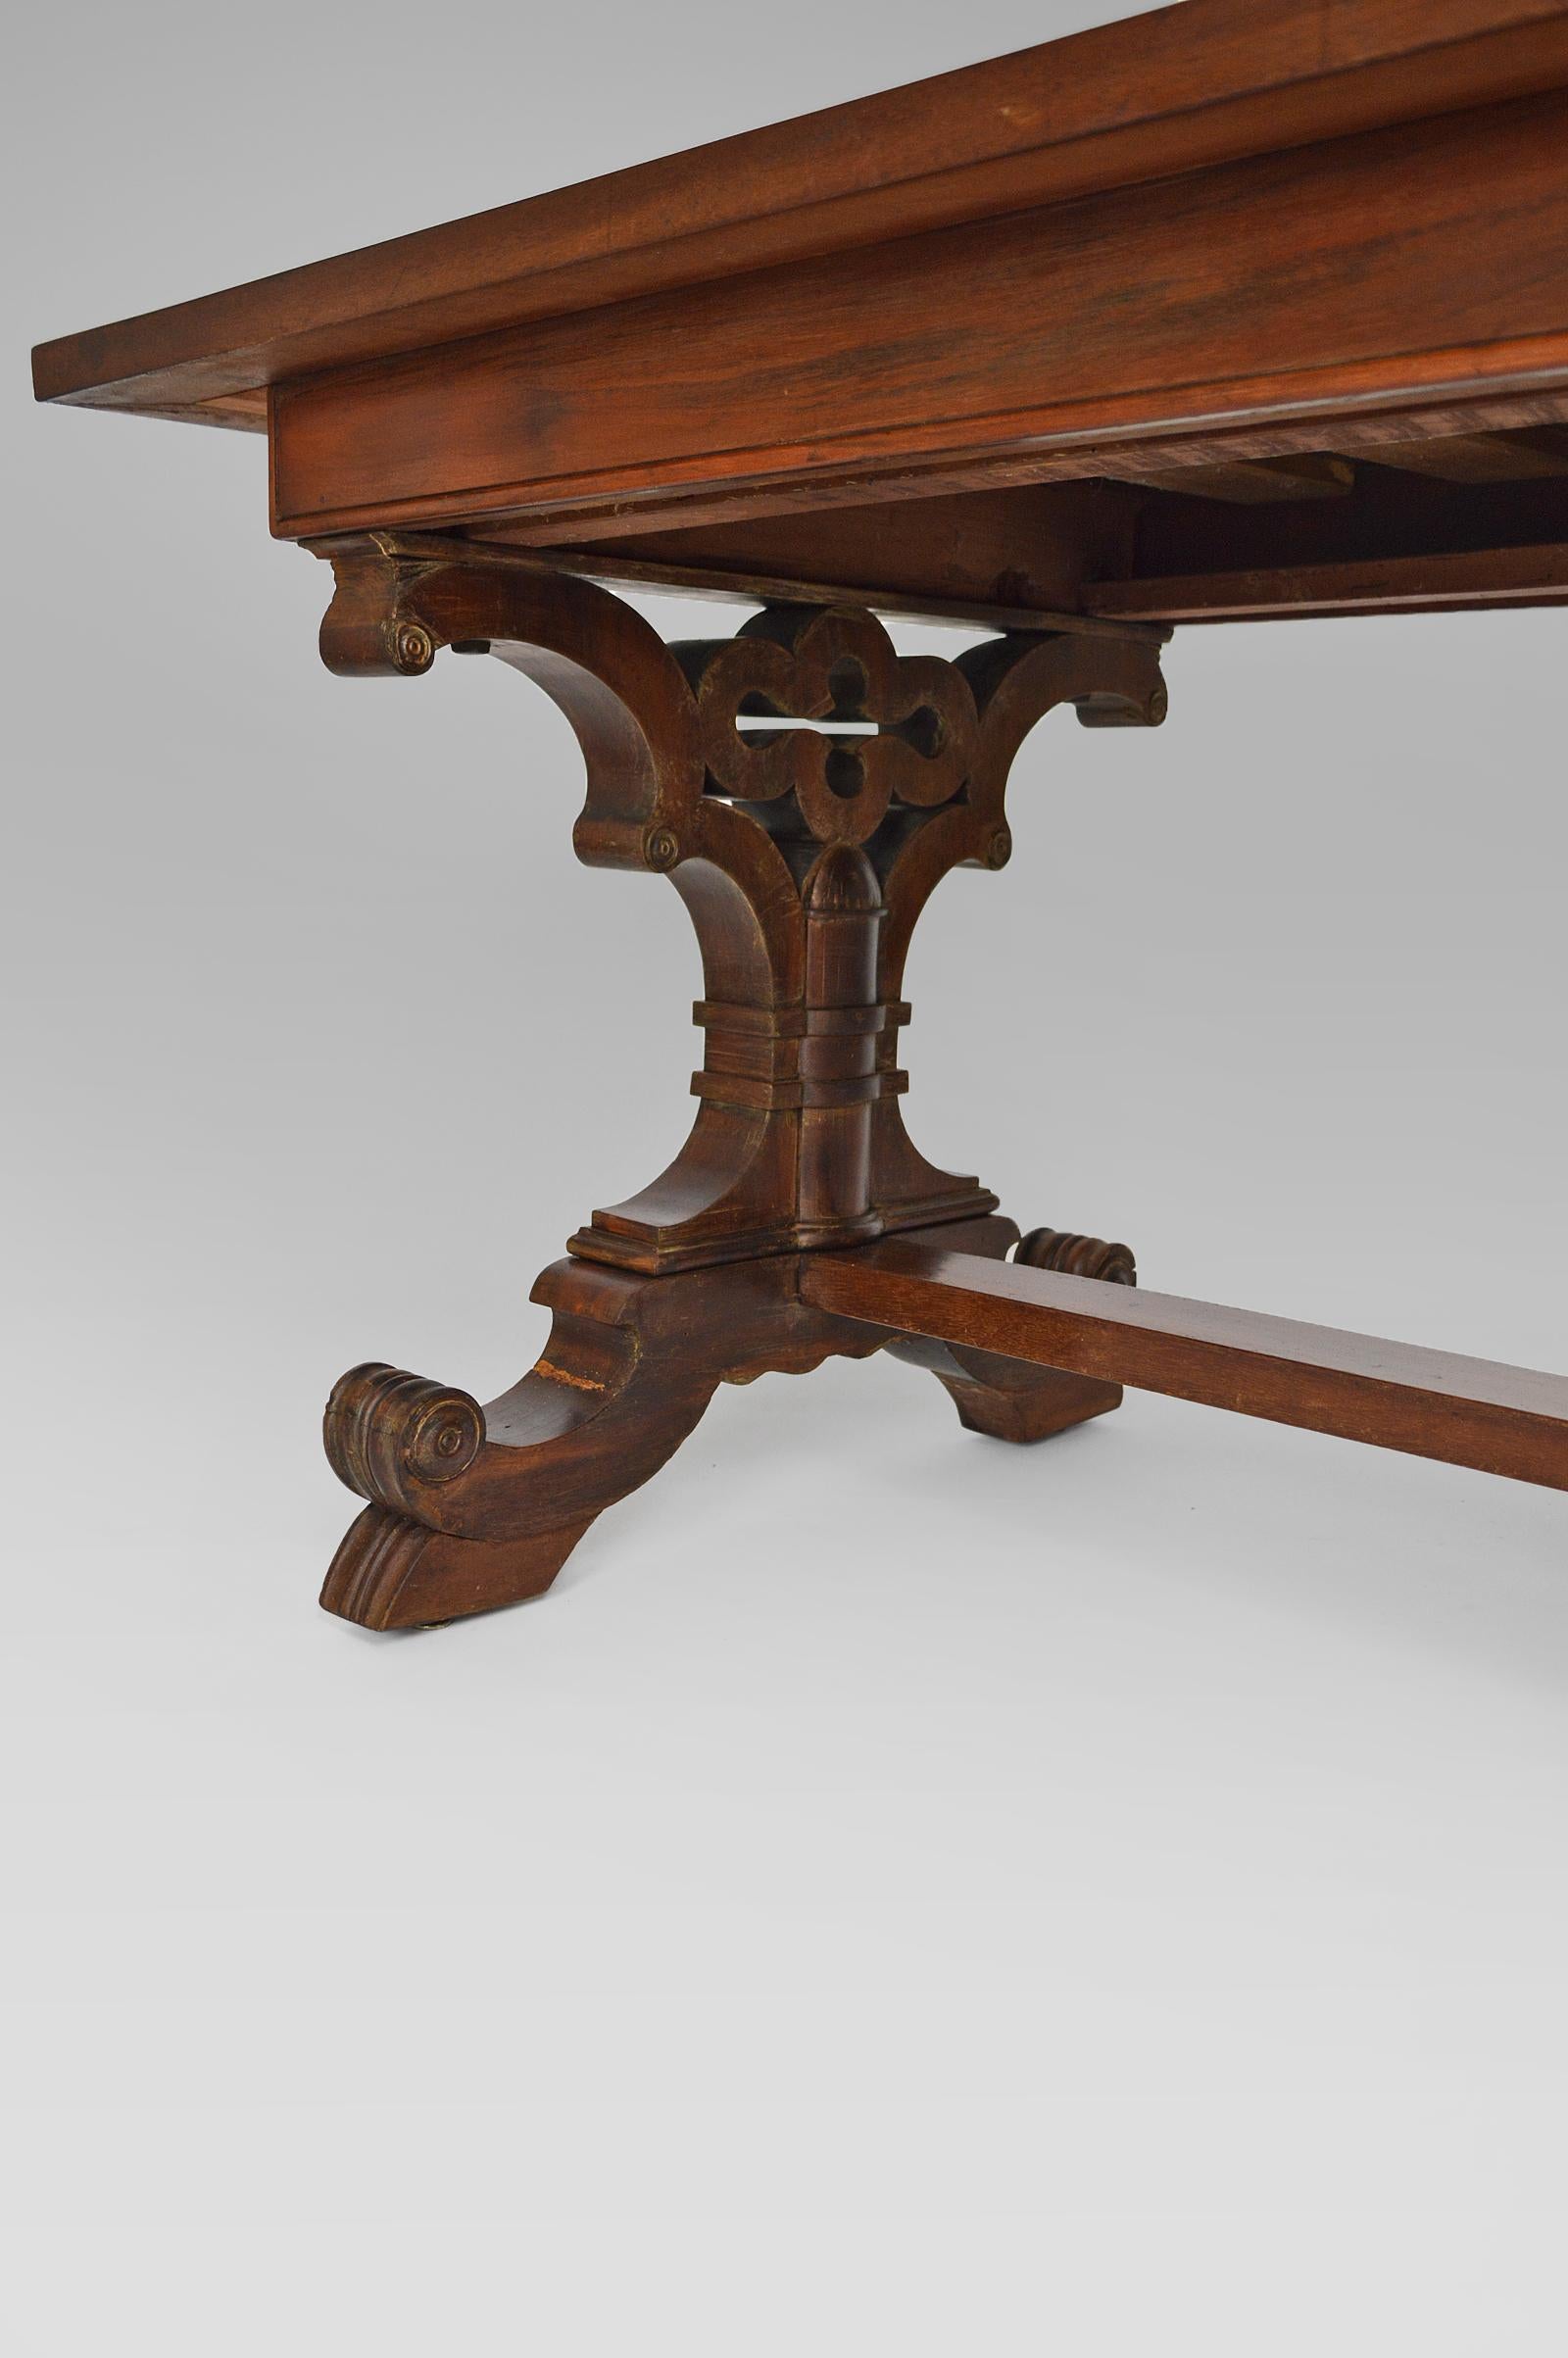 Gothic Revival Dining Table in Mahogany, Victorian Era, circa 1840 For Sale 6